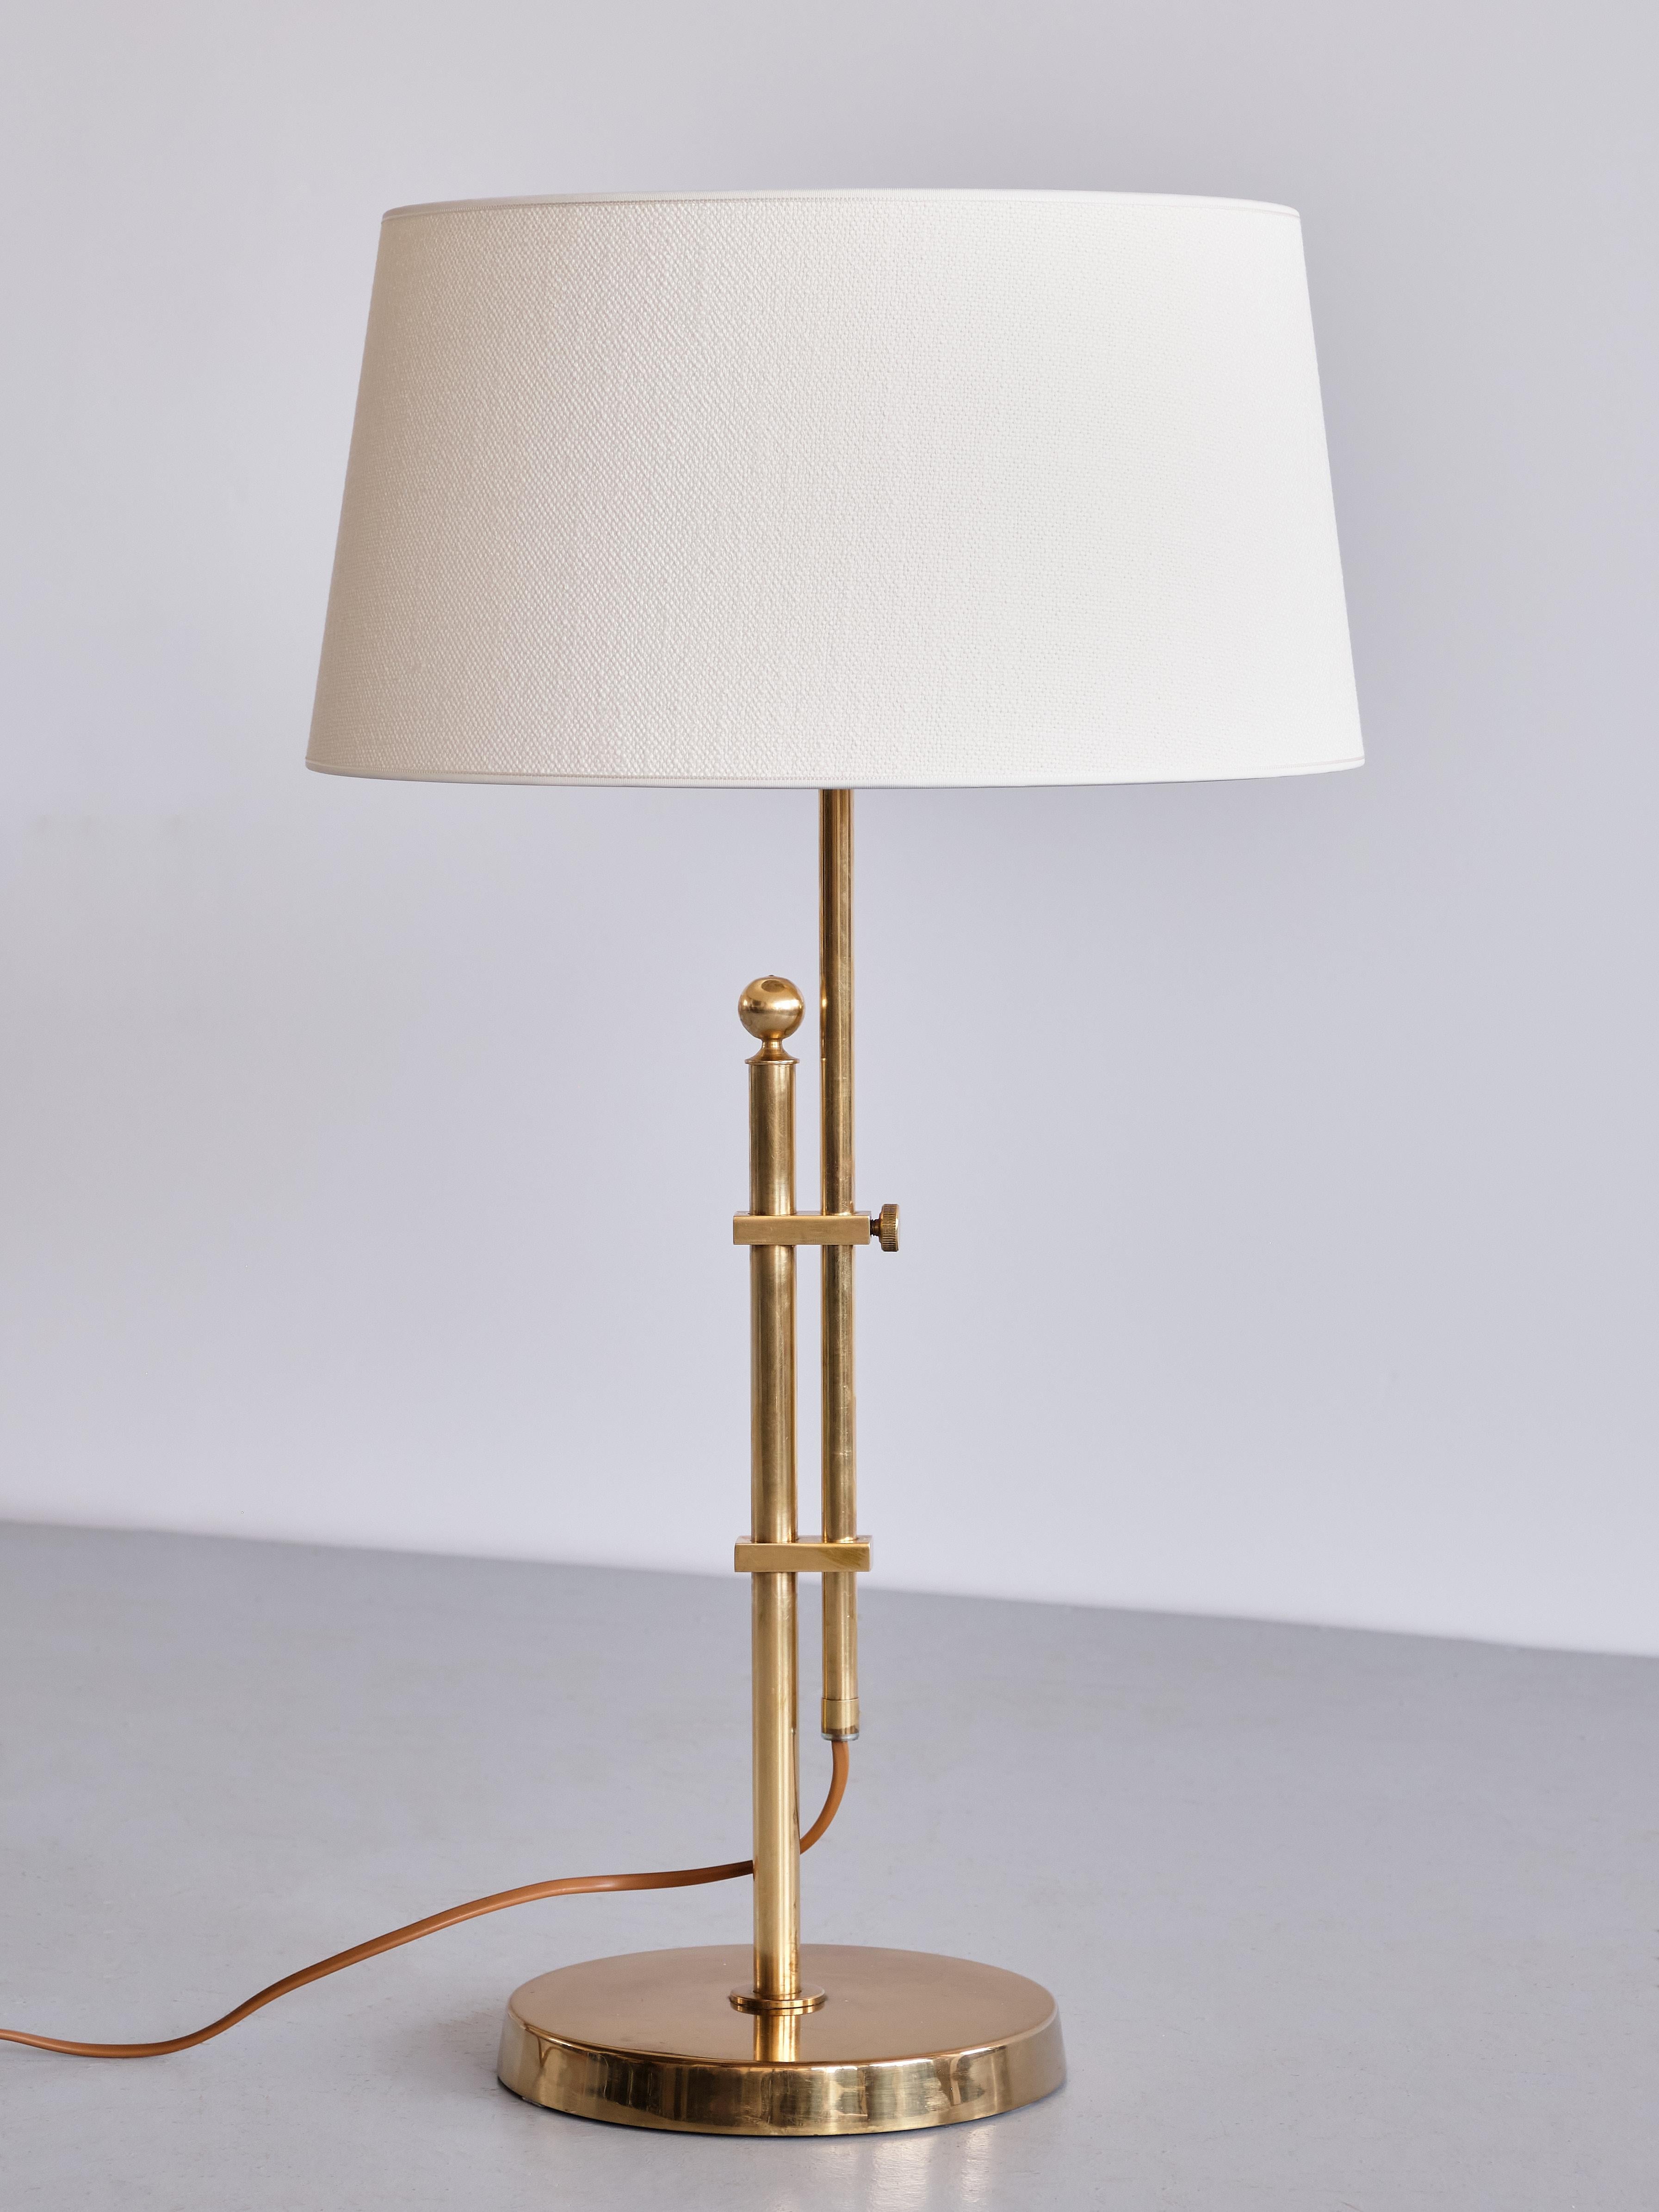 This striking table lamp was produced by Bergboms in Sweden in the 1950s. This particular model is numbered B-131. The lamp is labeled with both Bergboms and the model number on the bottom of the base.
The base is marked by the two brass vertical